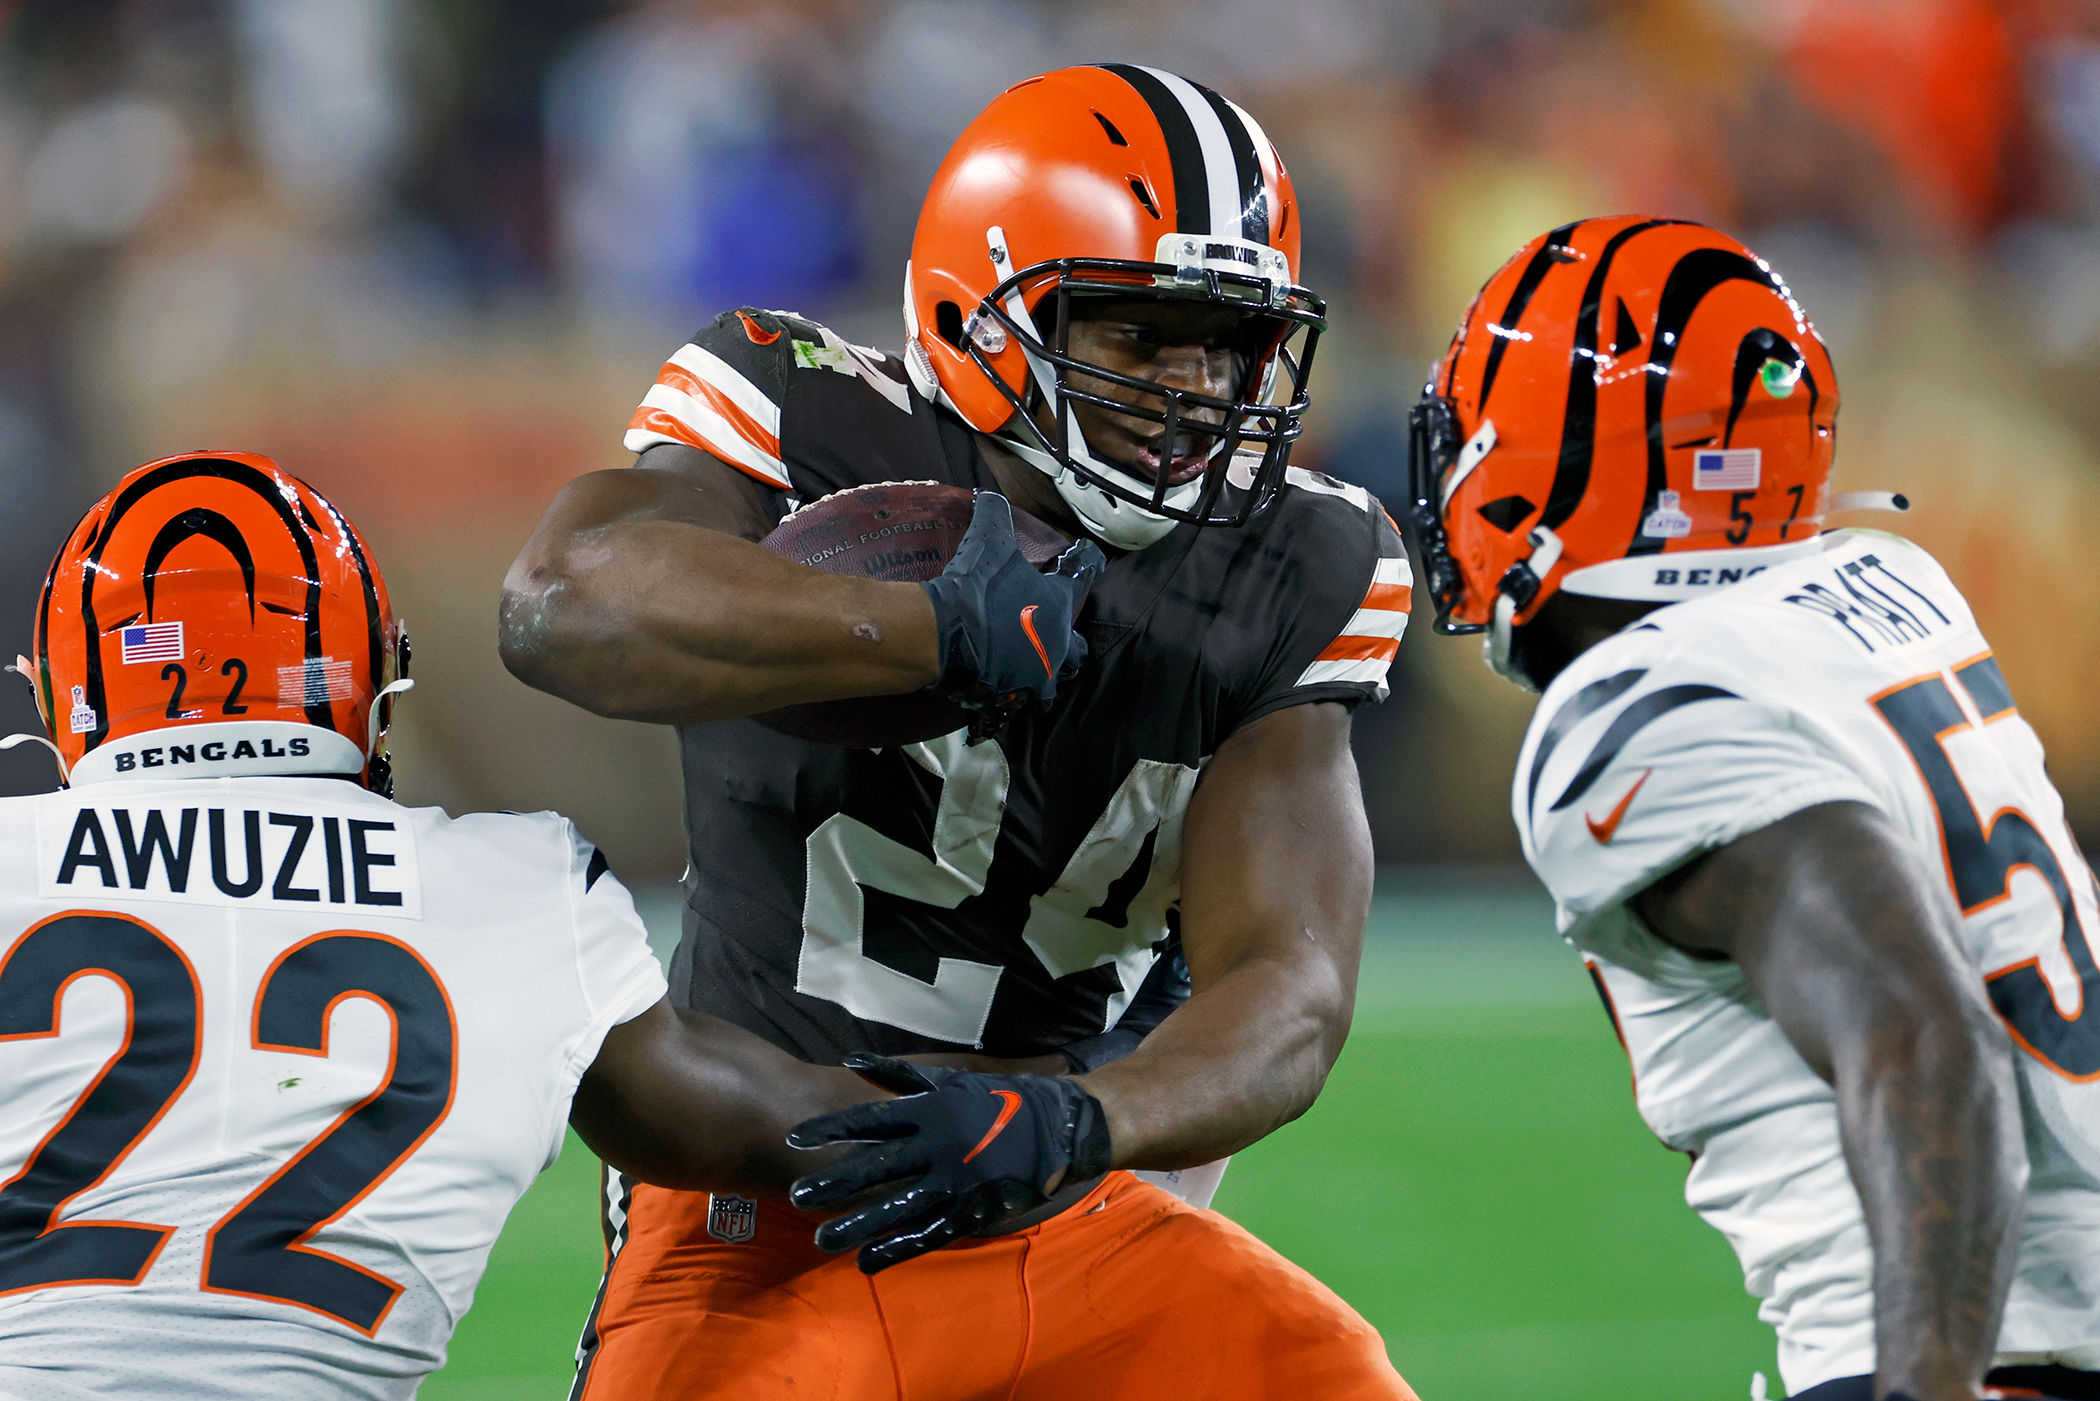 Browns RB Nick Chubb suffers injury after collision with Steelers safety Minkah Fitzpatrick | Watch Reactions